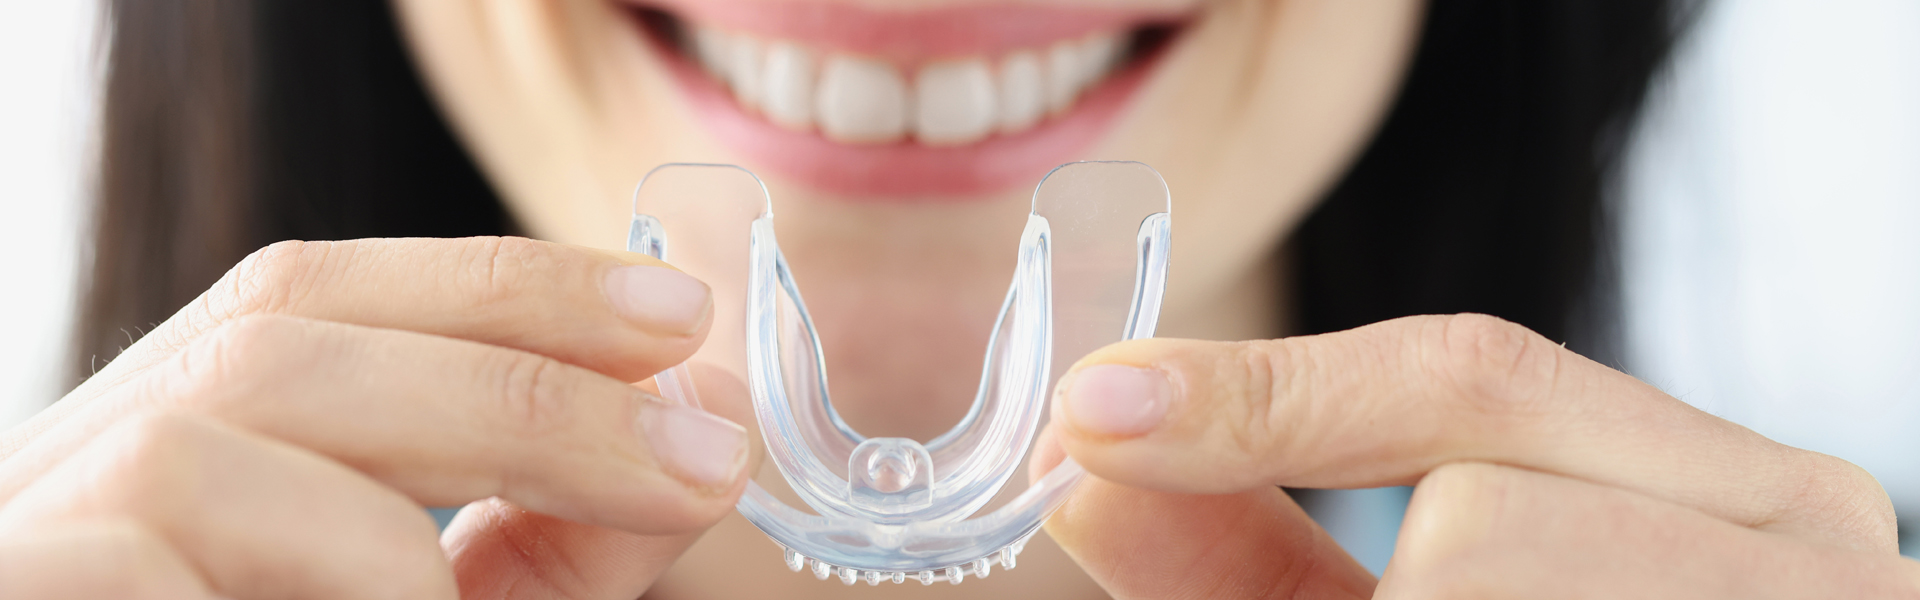 5 Top Reasons to Wear a Mouth Guard